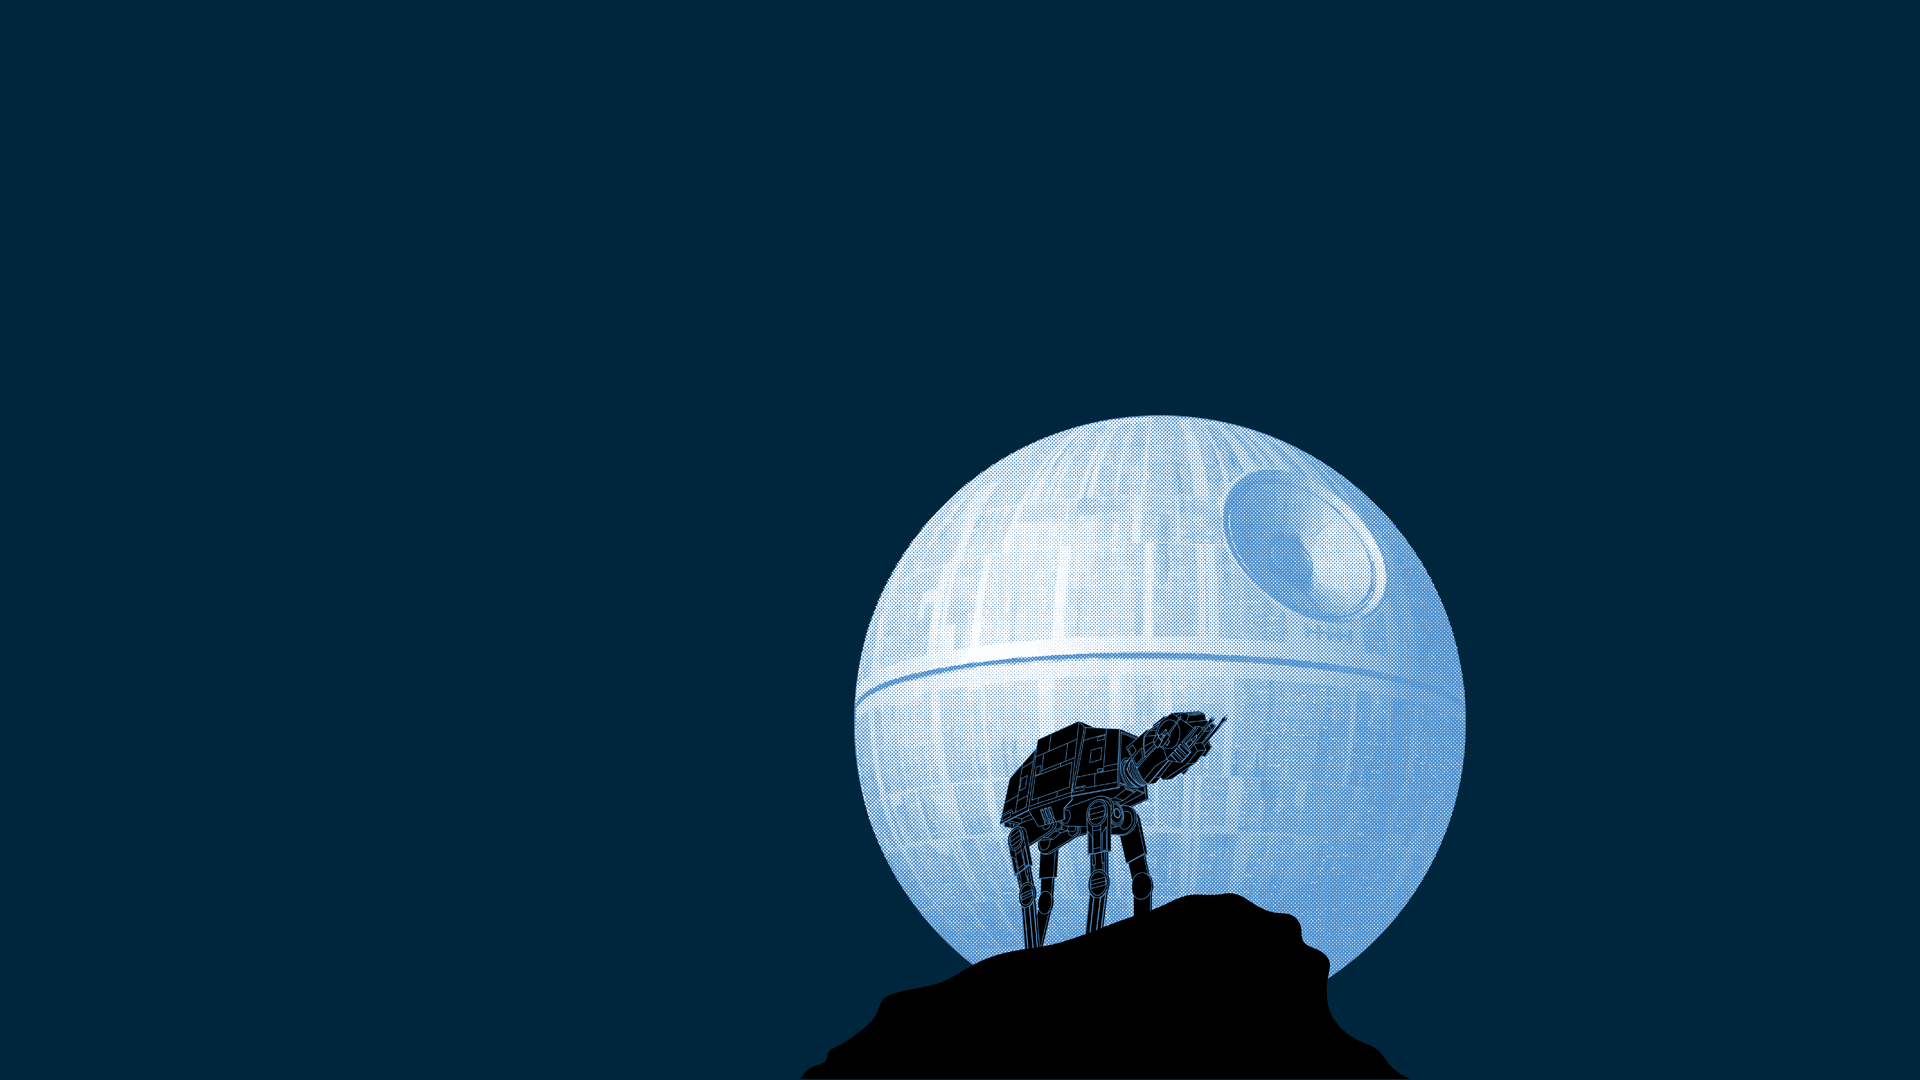 star wars, Death Star wallpaper and image, picture